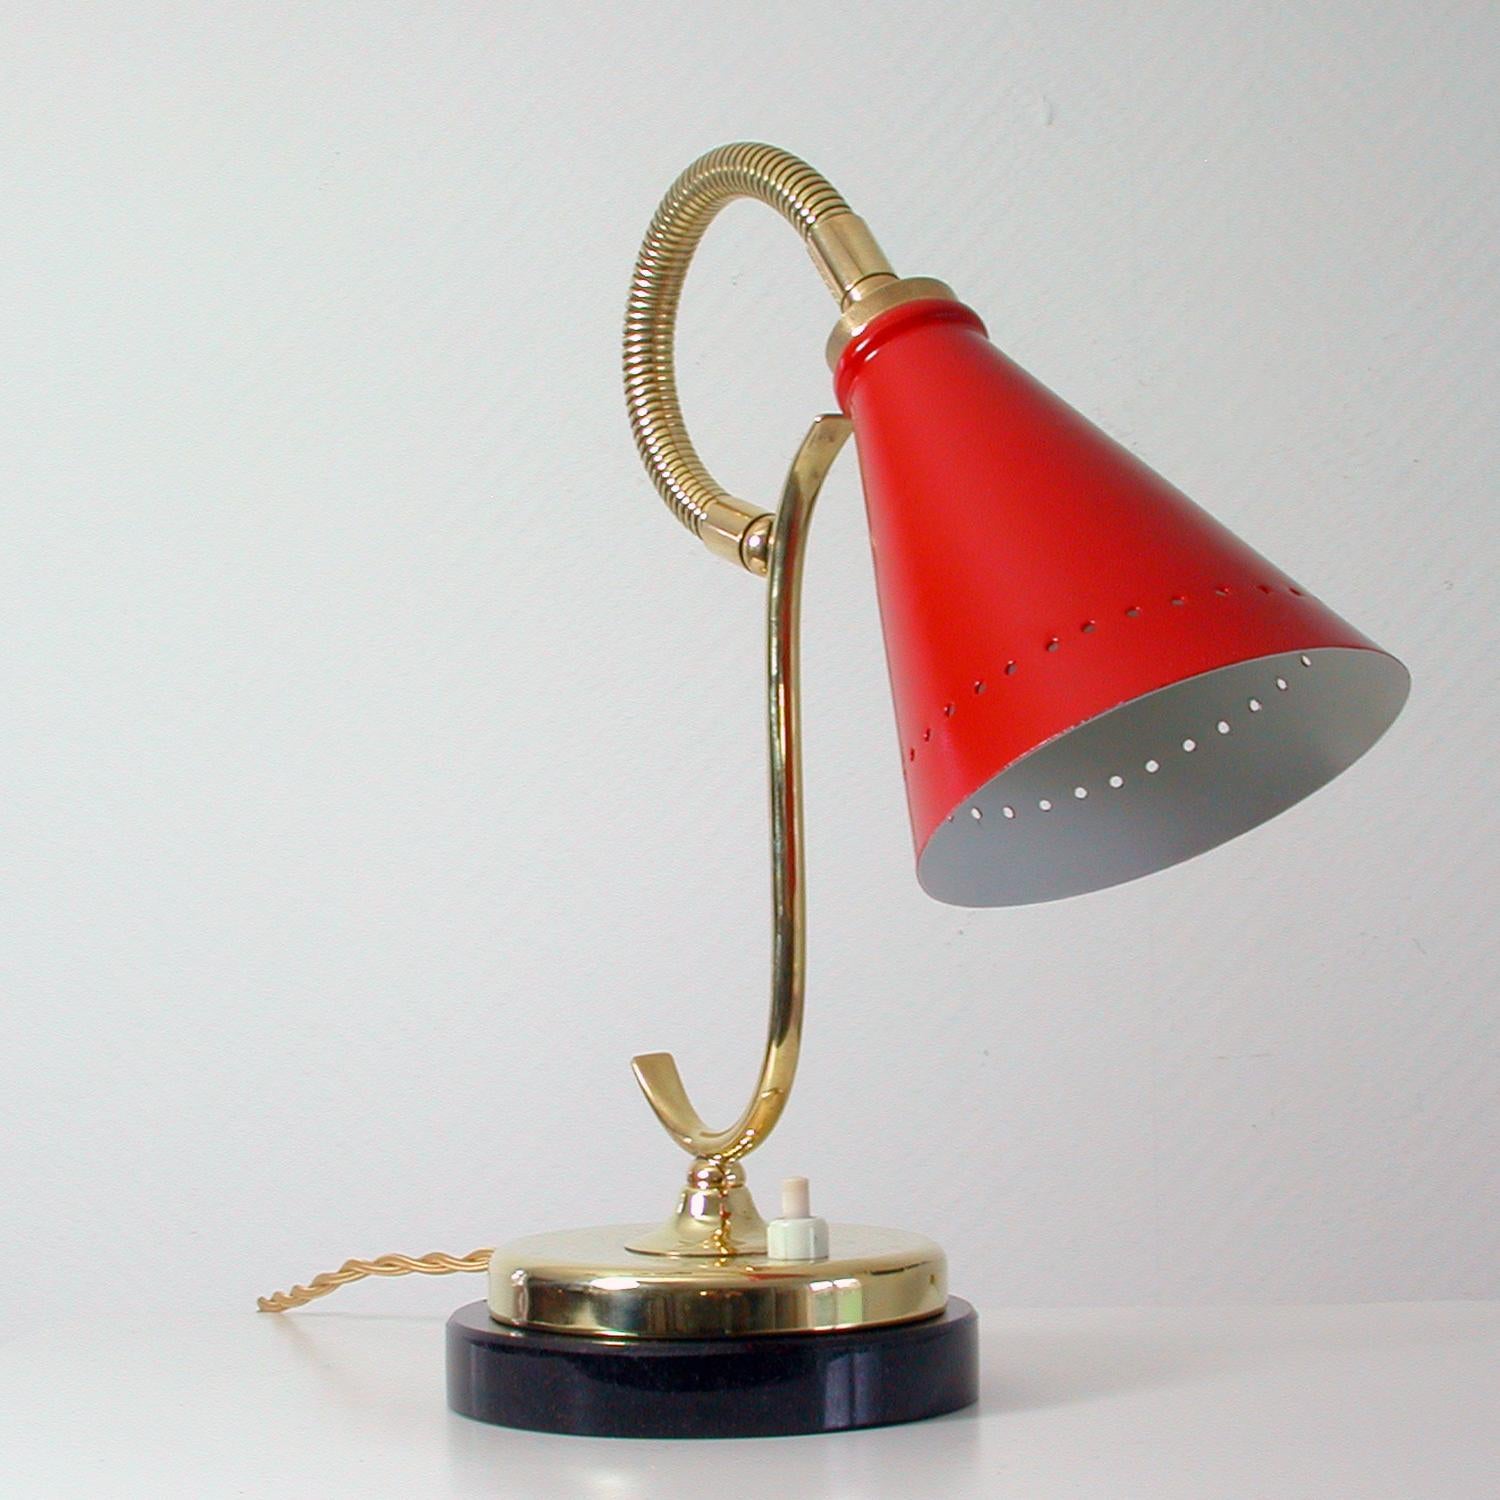 This midcentury table lamp was designed and manufactured in France in the 1950s.
It has got a red lacquered aluminum lamp shade, an adjustable brass gooseneck lamp arm, brass lamp foot and stands on a black marble base.
The lamp has got a French